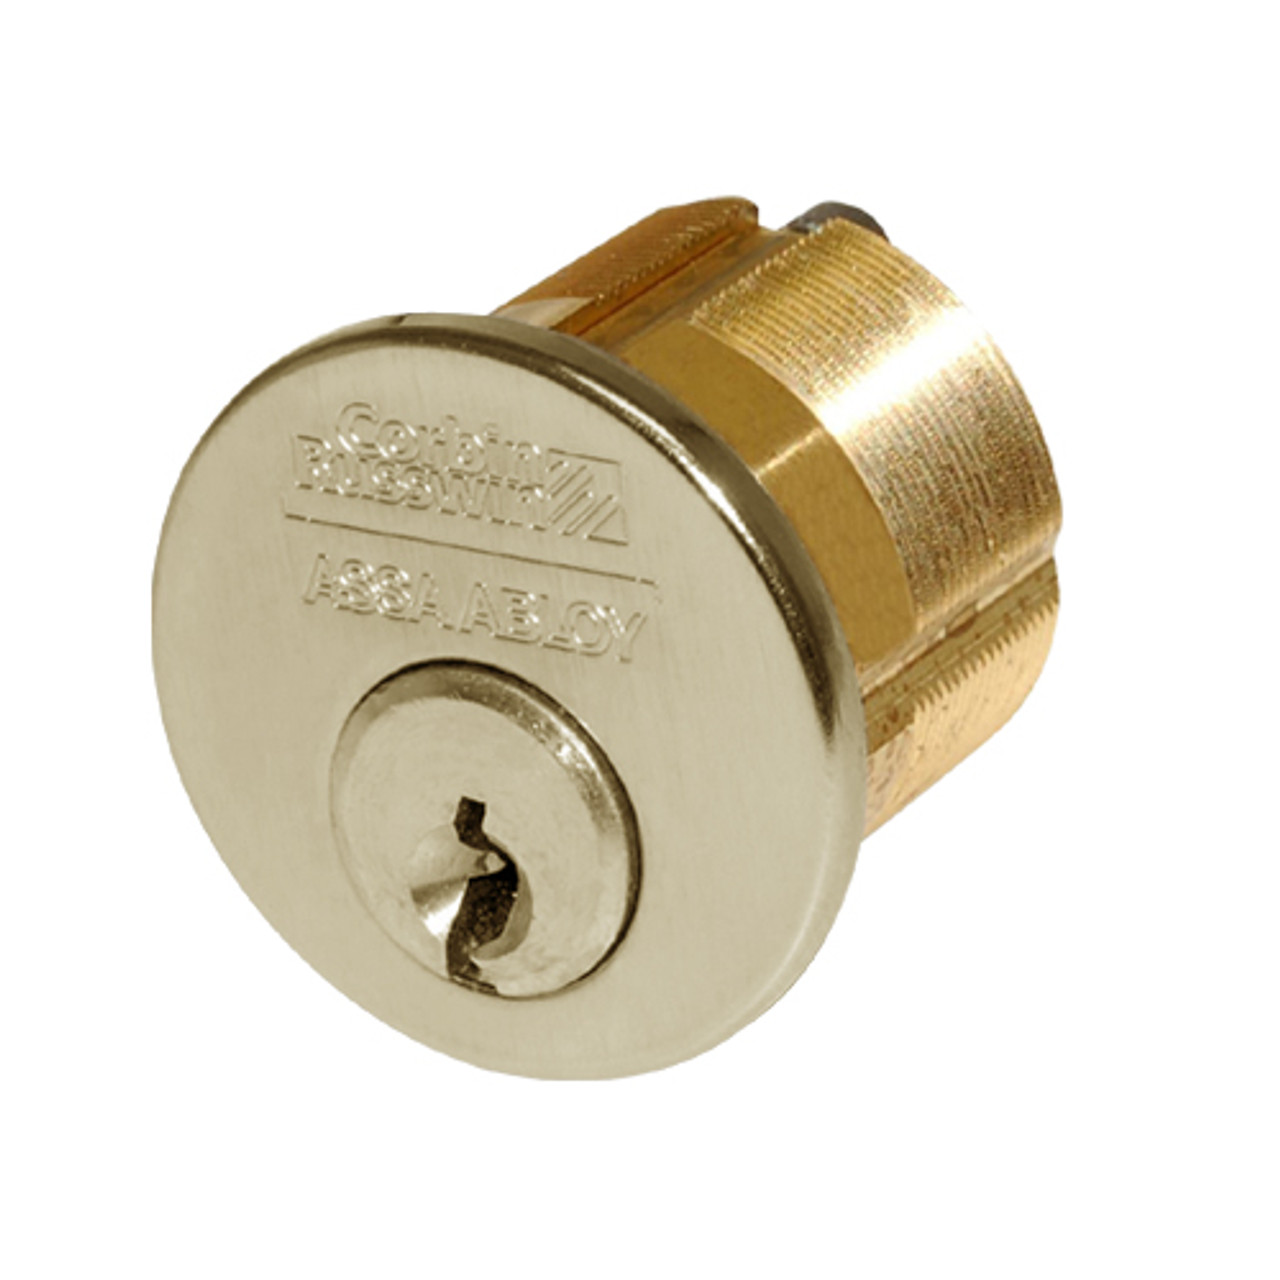 CR1000-134-A01-6-D3-606 Corbin Conventional Mortise Cylinder for Mortise Lock and DL3000 Deadlocks with Cloverleaf Cam in Satin Brass Finish